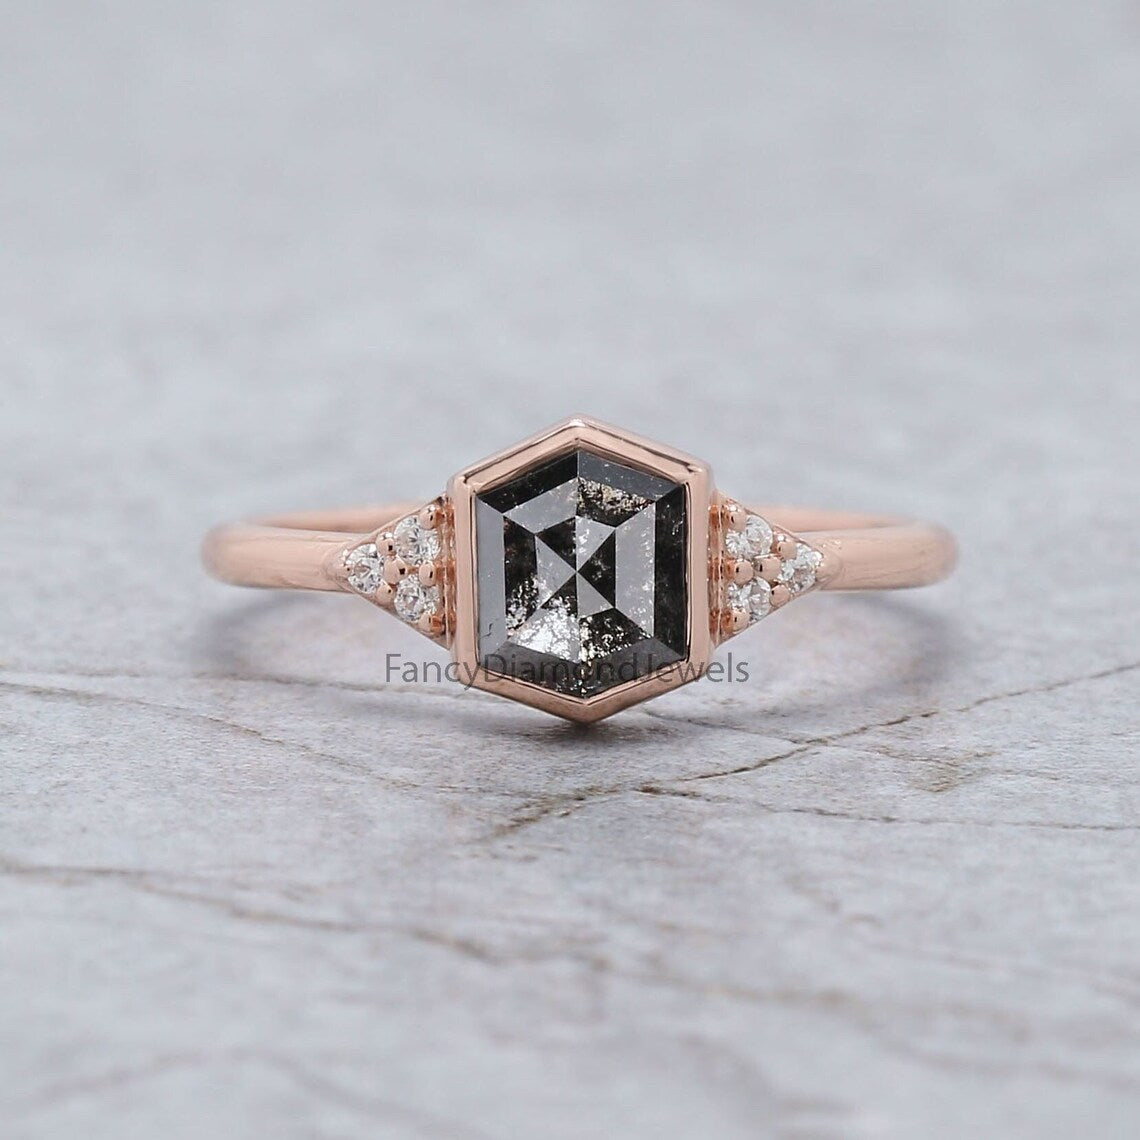 Hexagon Salt And Pepper Diamond Ring 0.89 Ct 6.37 MM Hexagon Cut Diamond Ring 14K Solid Rose Gold Silver Engagement Ring Gift For Her QL2163